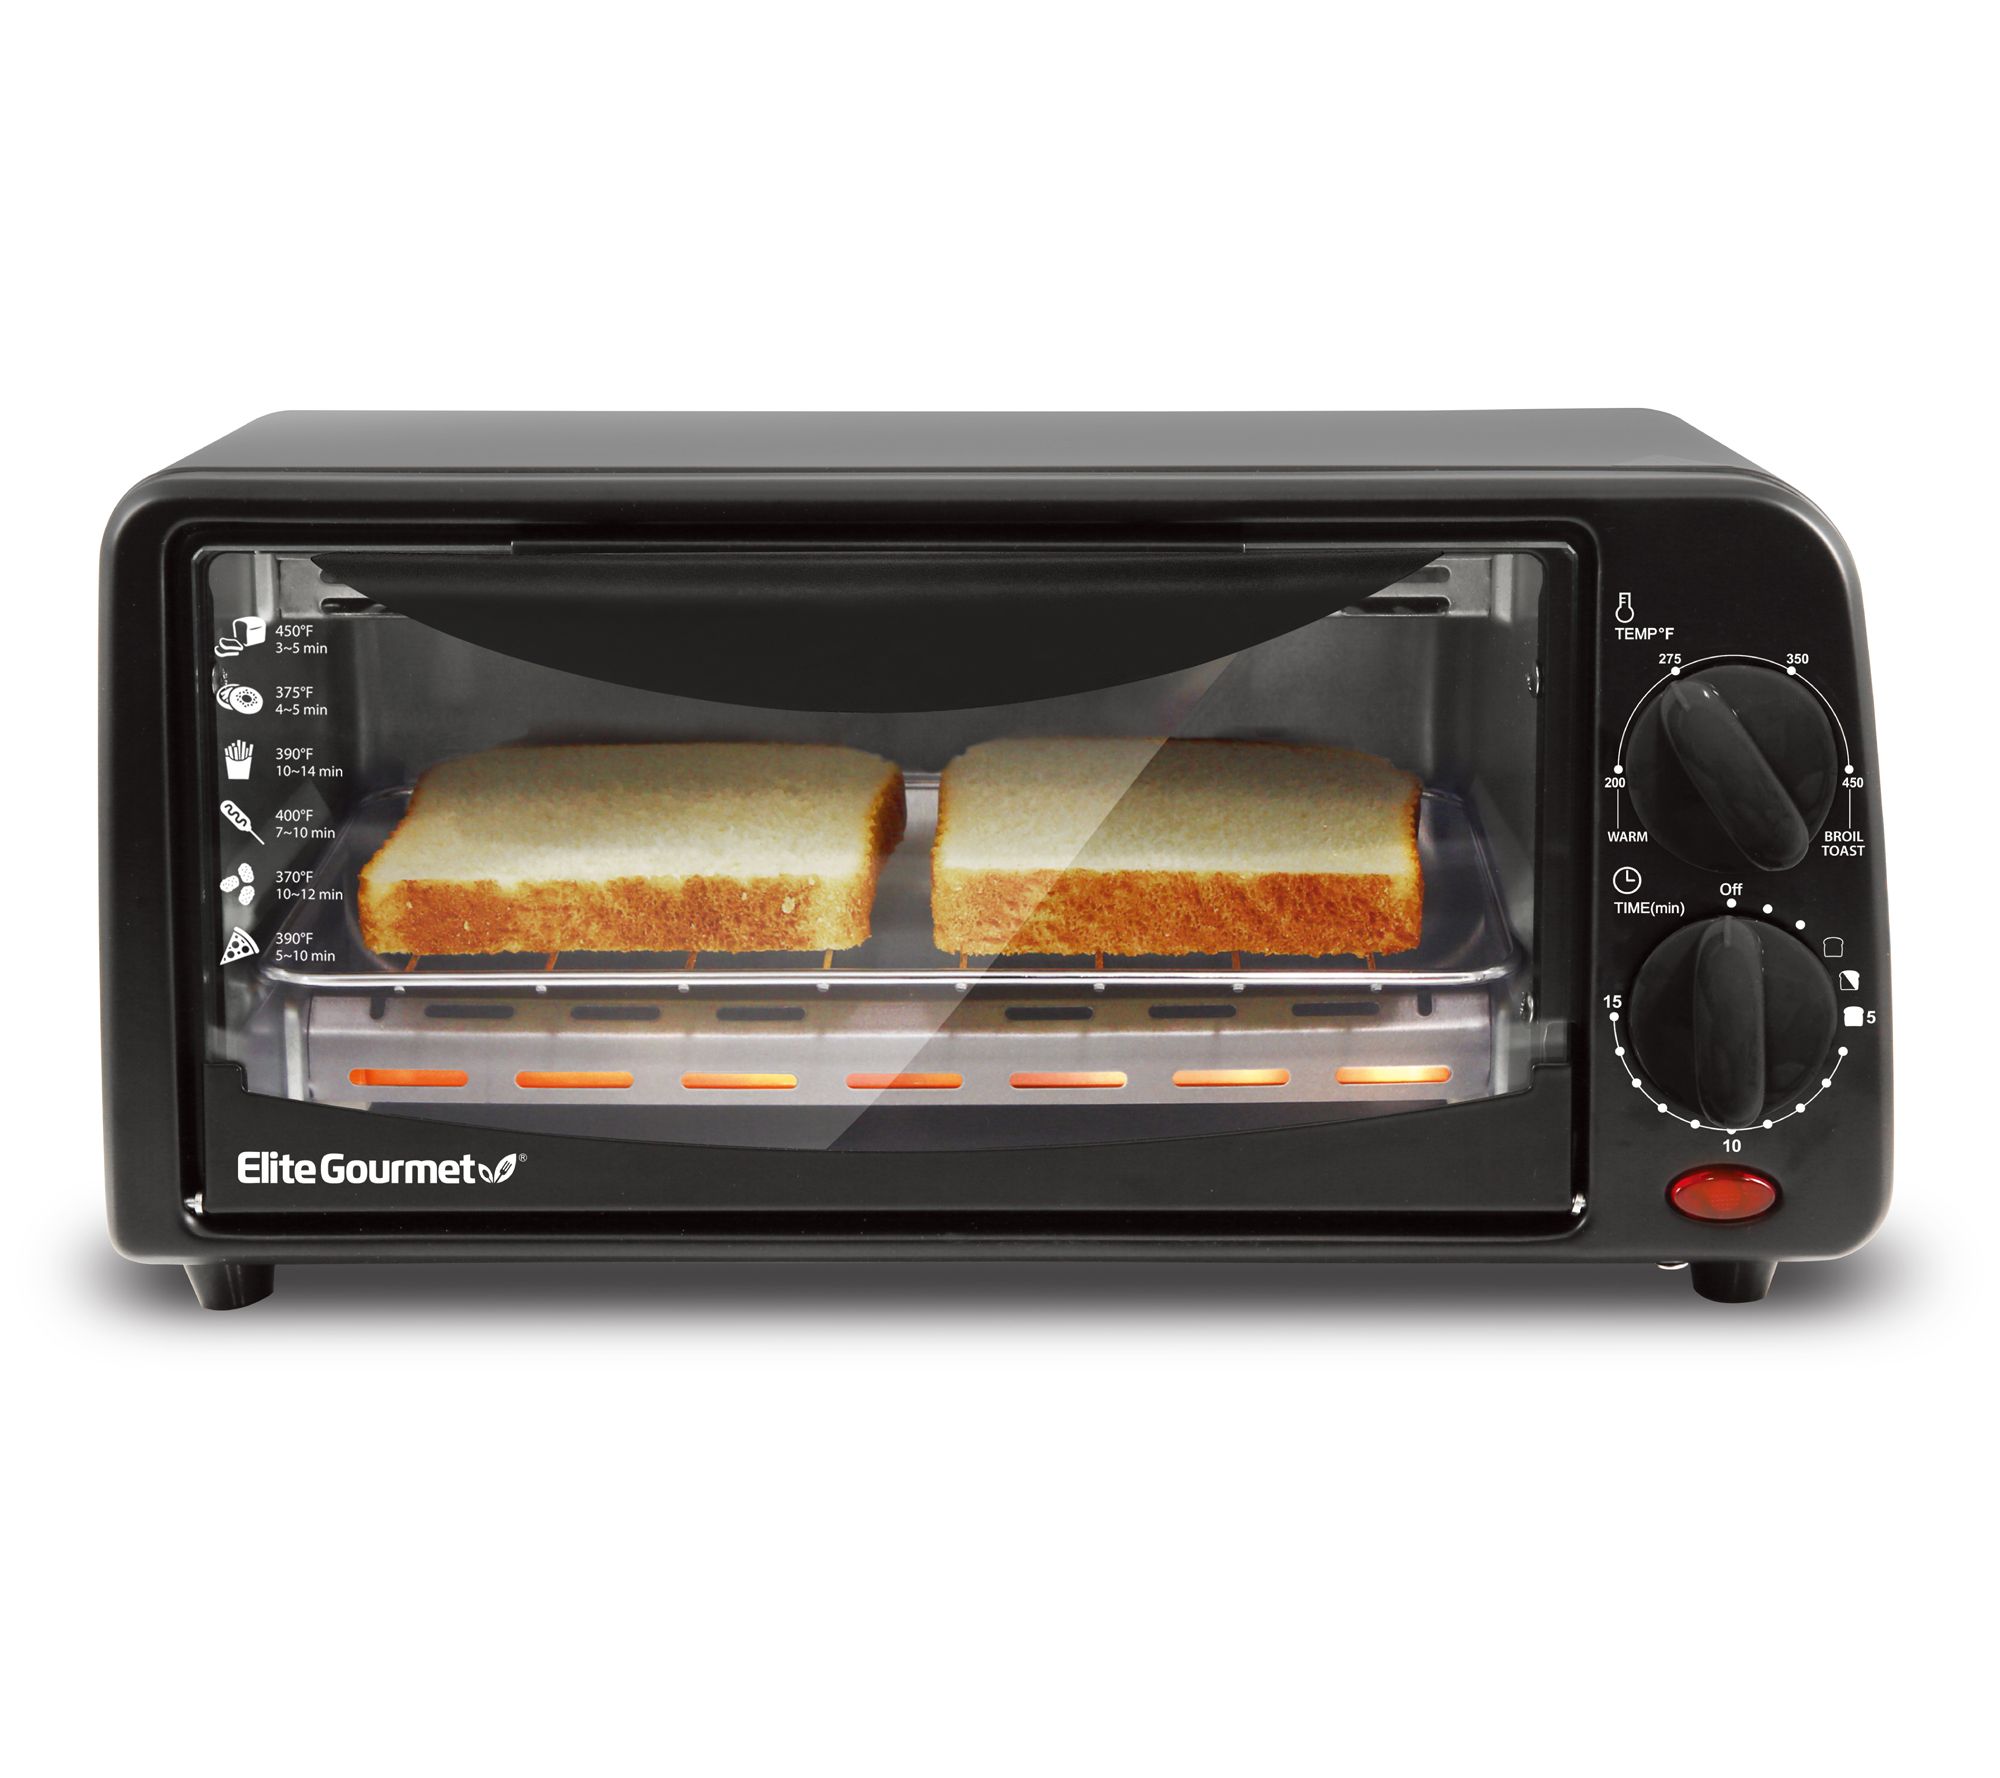 5 minutes until dinner with Black and Decker toaster oven